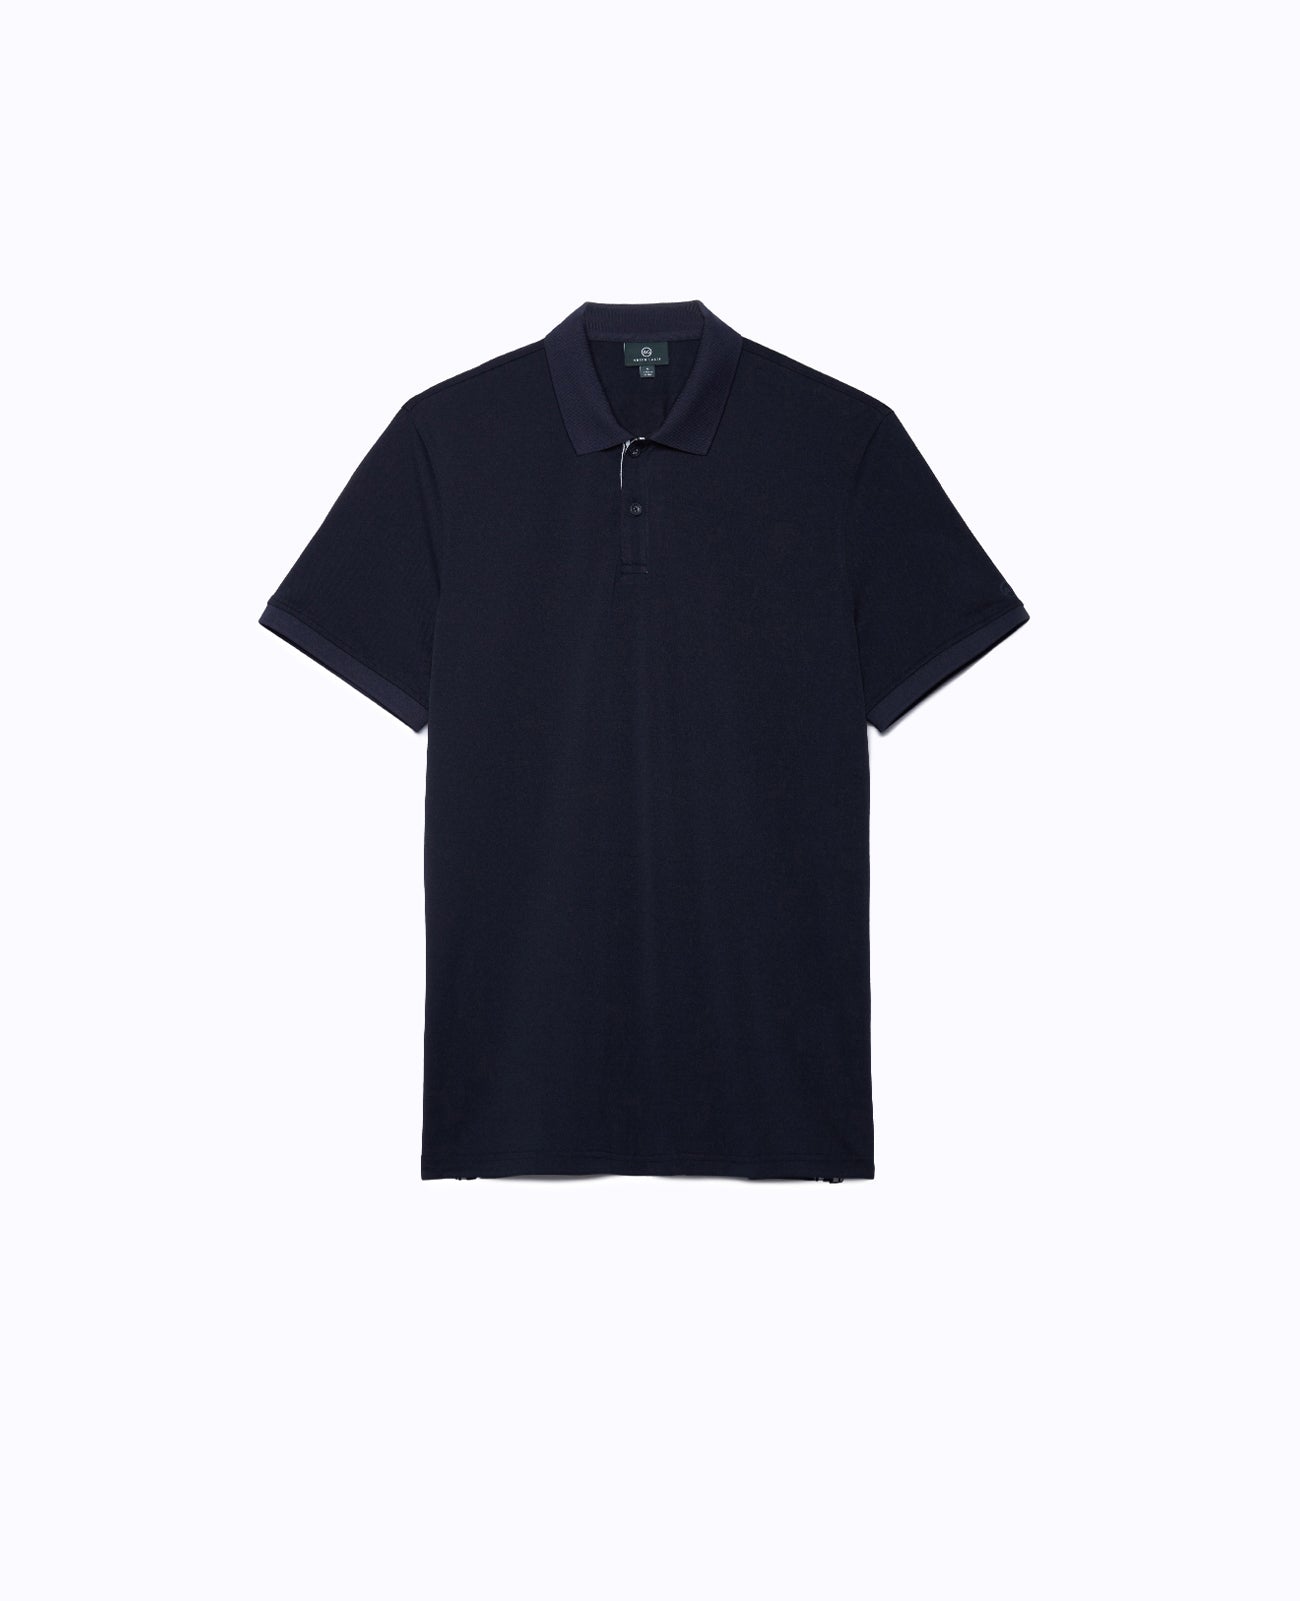 Berrian Polo Naval Blue Green Label Collection Men Tops Photo 6